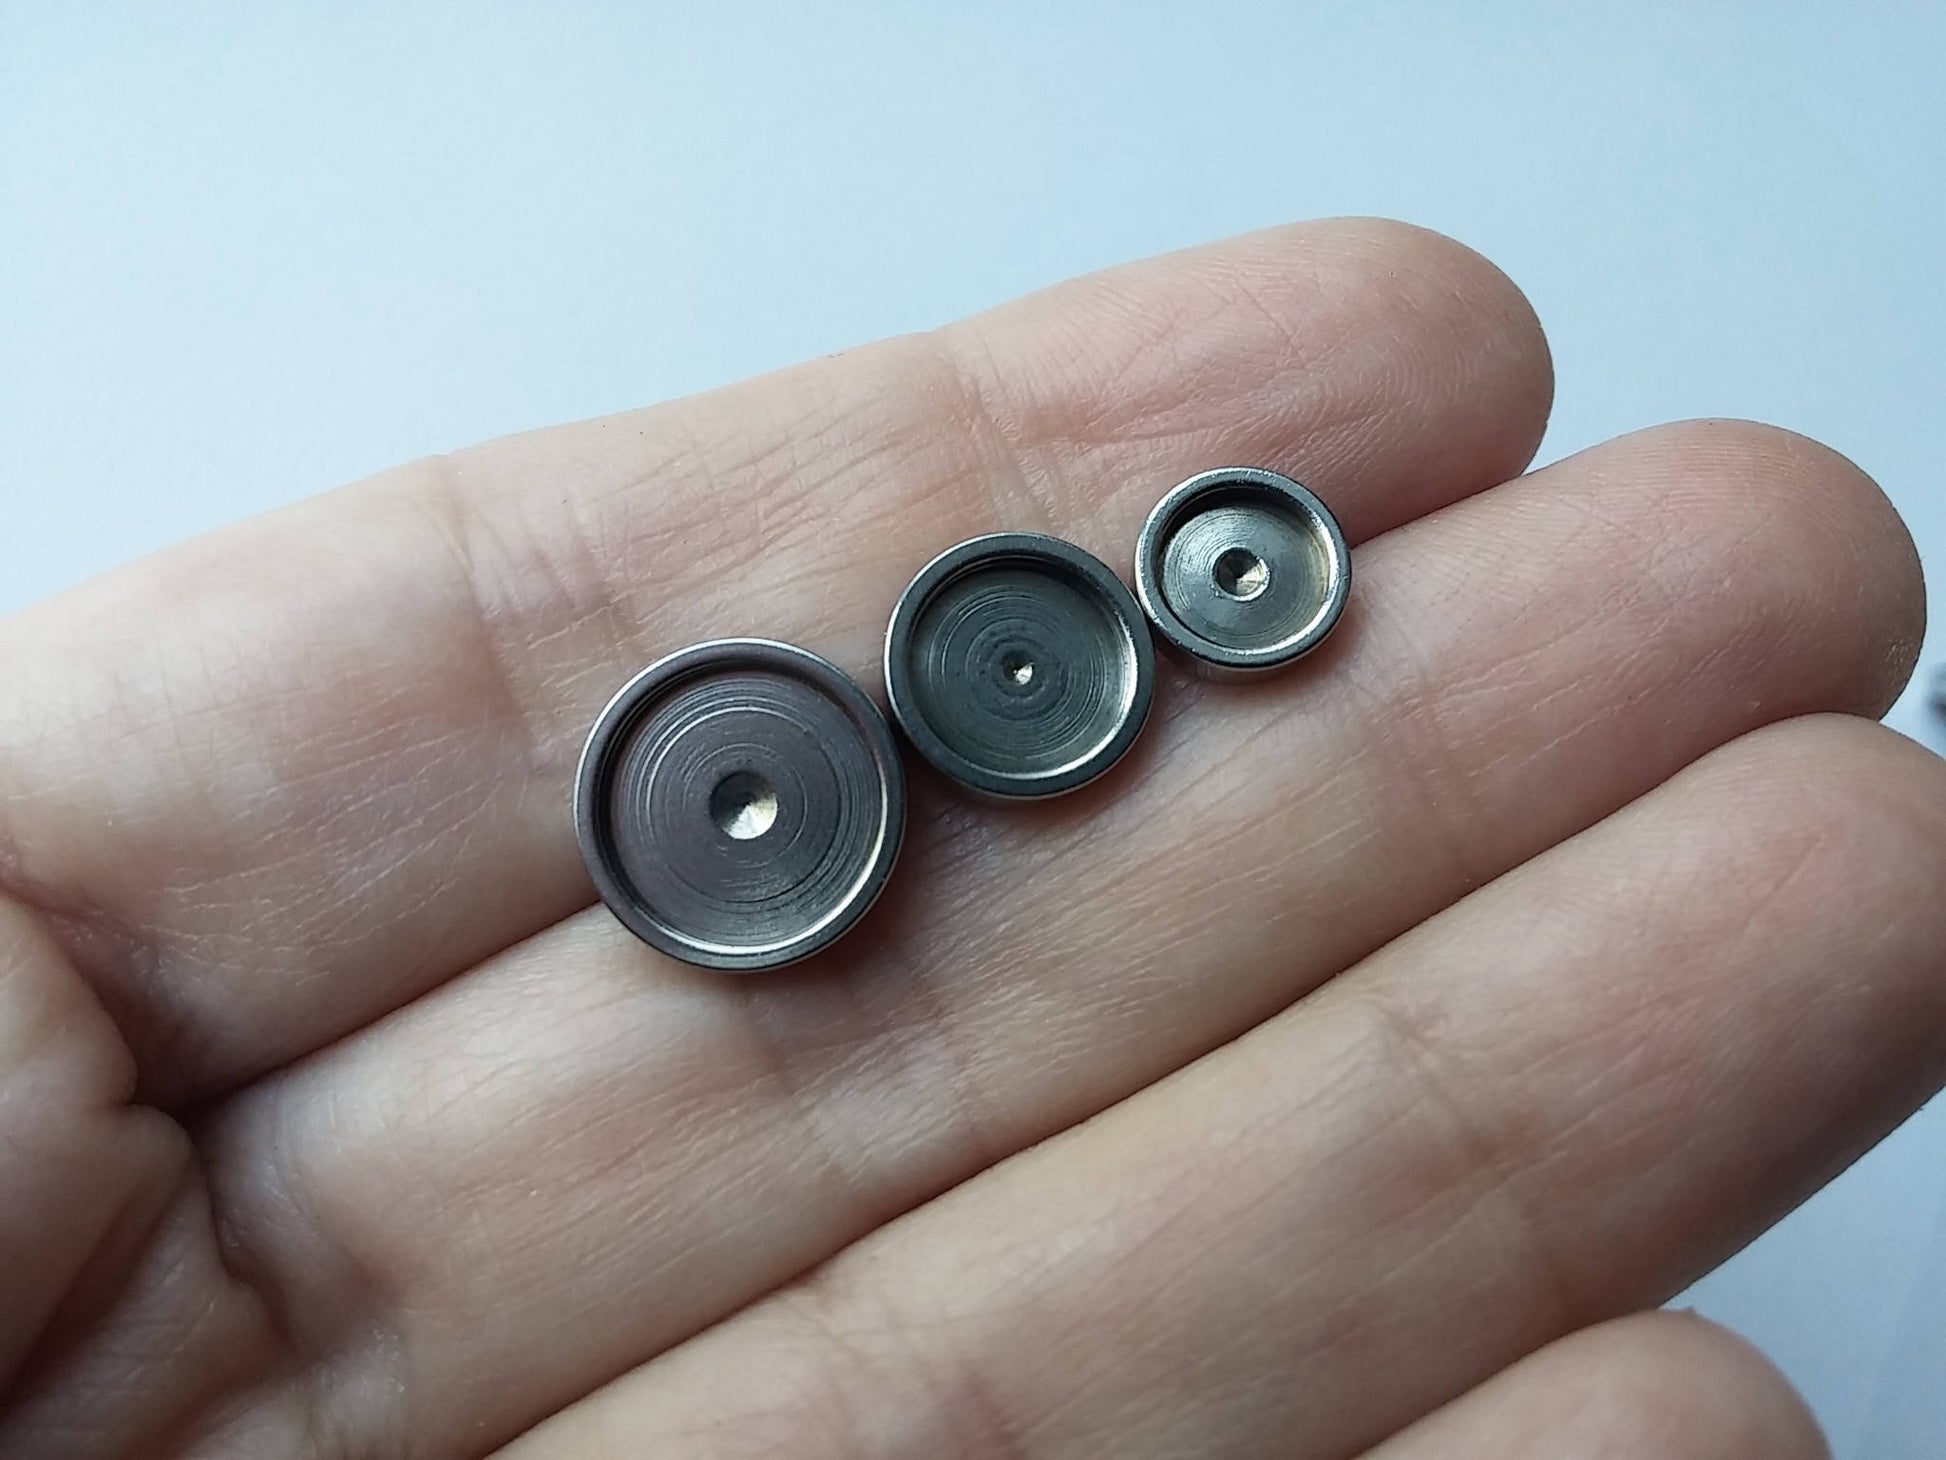 10 Stainless steel ear stud cabochon settings - fits 6, 8 or 10mm cabochons